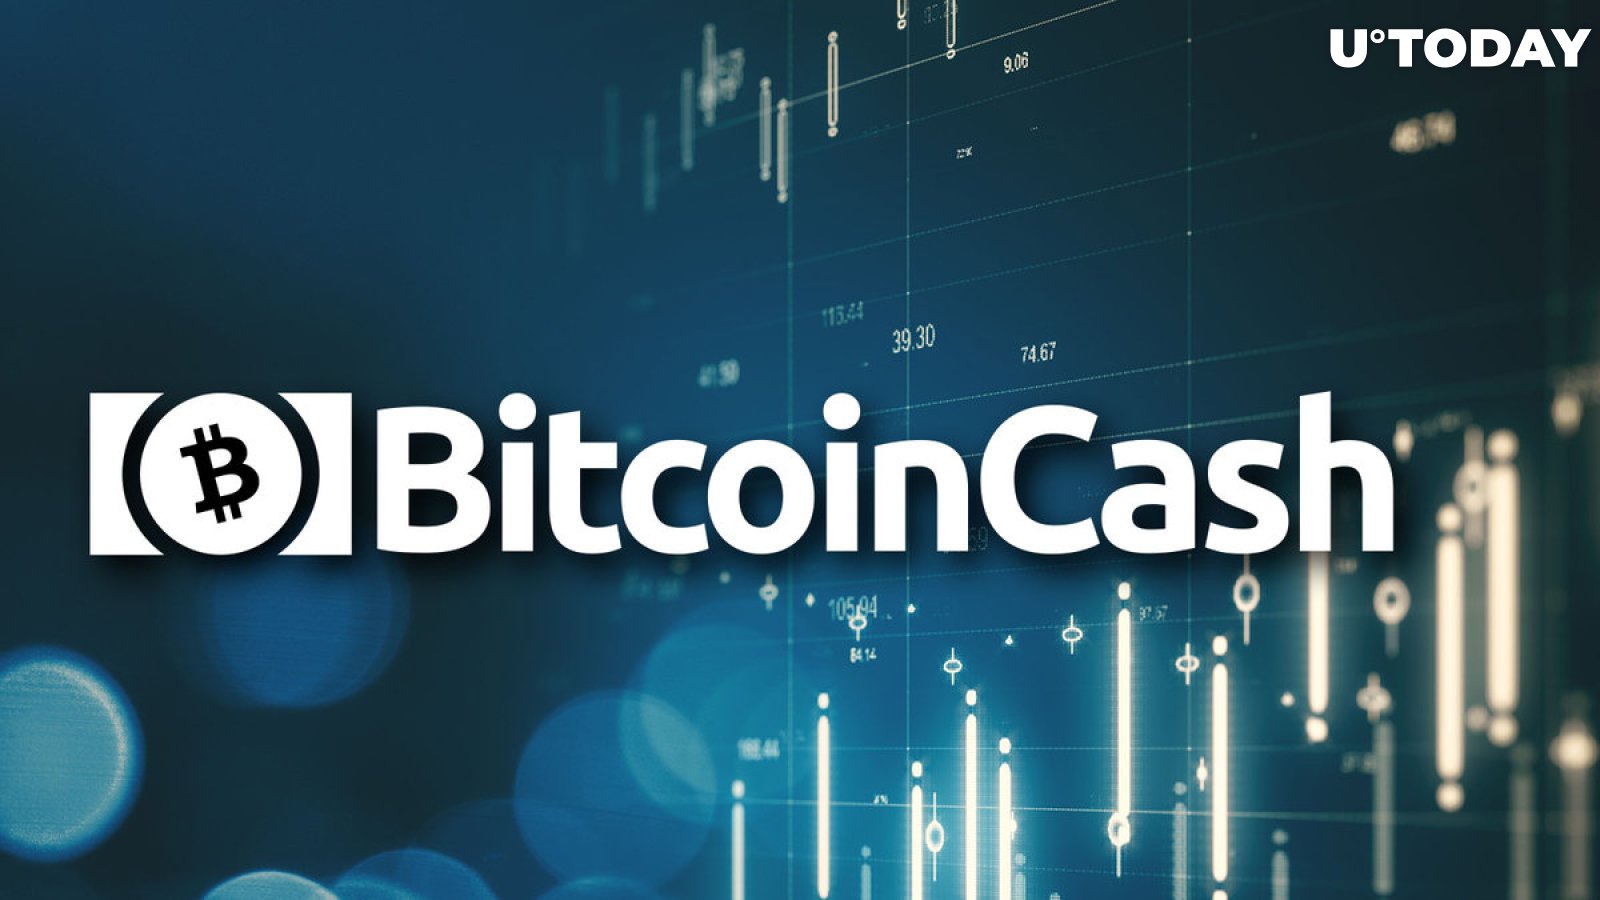 Bitcoin Cash (BCH) up 8%, Is This Growth Connected to Bitcoin?